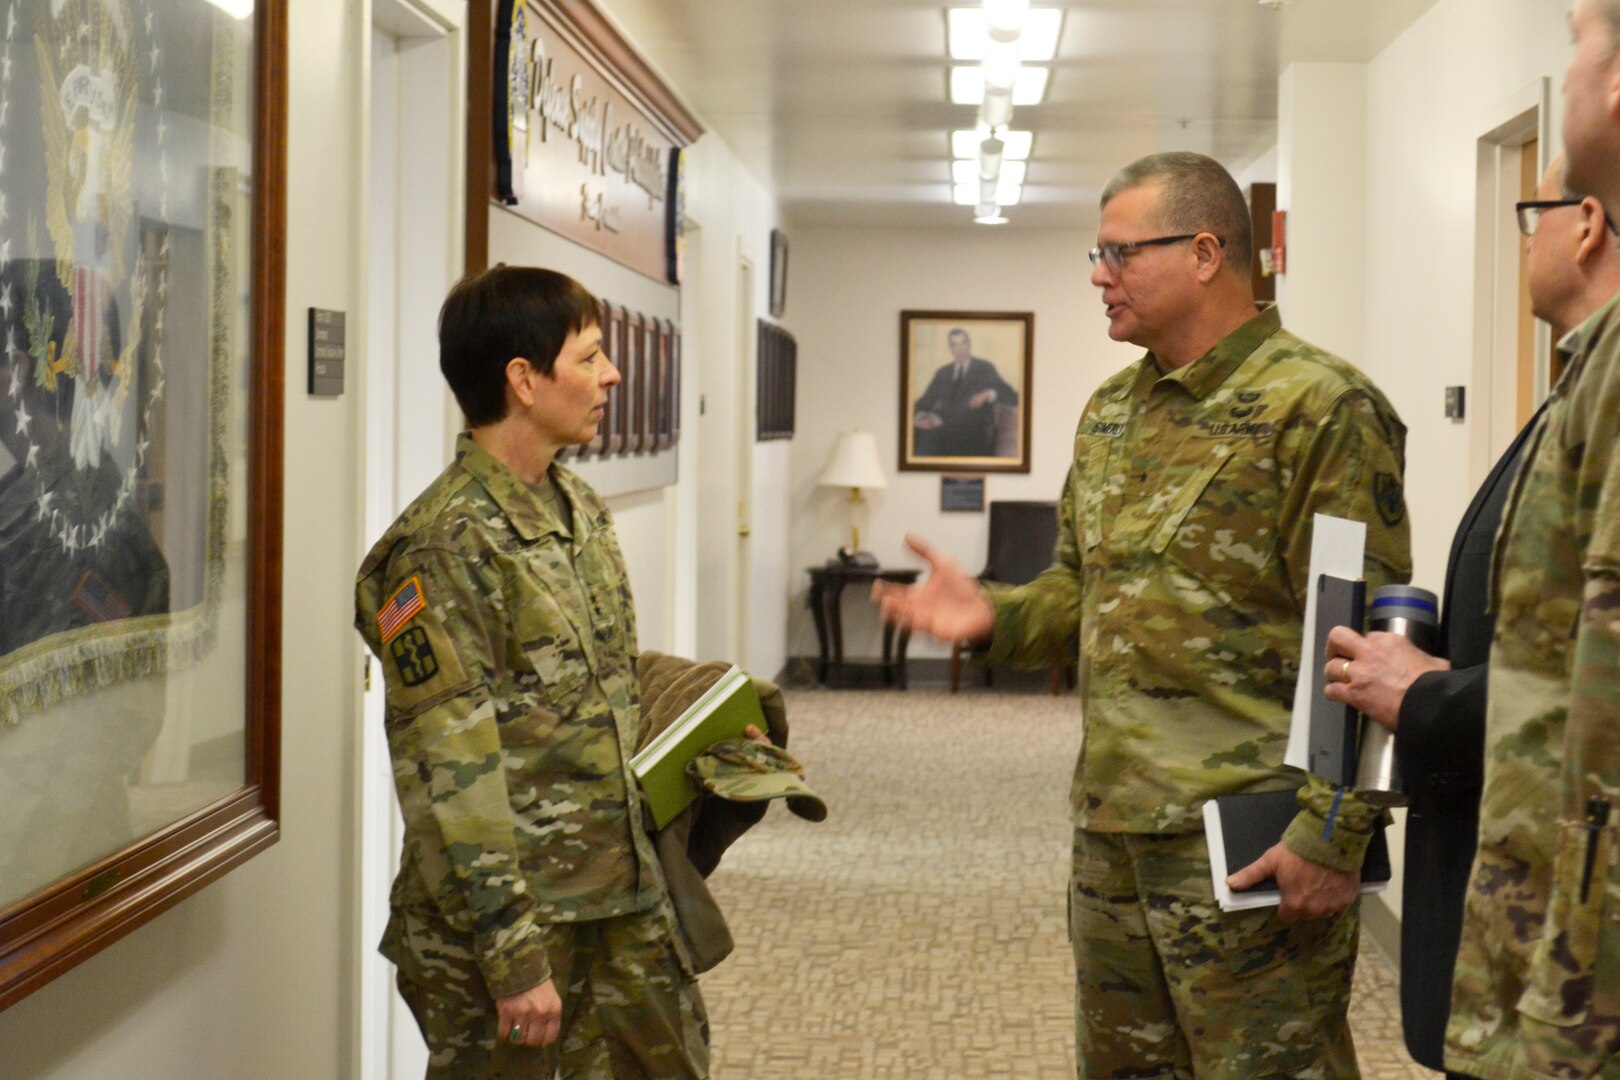 Army Maj. Gen. Barbara Holcomb, U.S. Army Medical Research and Material Command commanding general, left, speaks with Brig. Gen. Mark Simerly, DLA Troop Support commander, right, at DLA Troop Support, March 16, 2018, in Philadelphia.